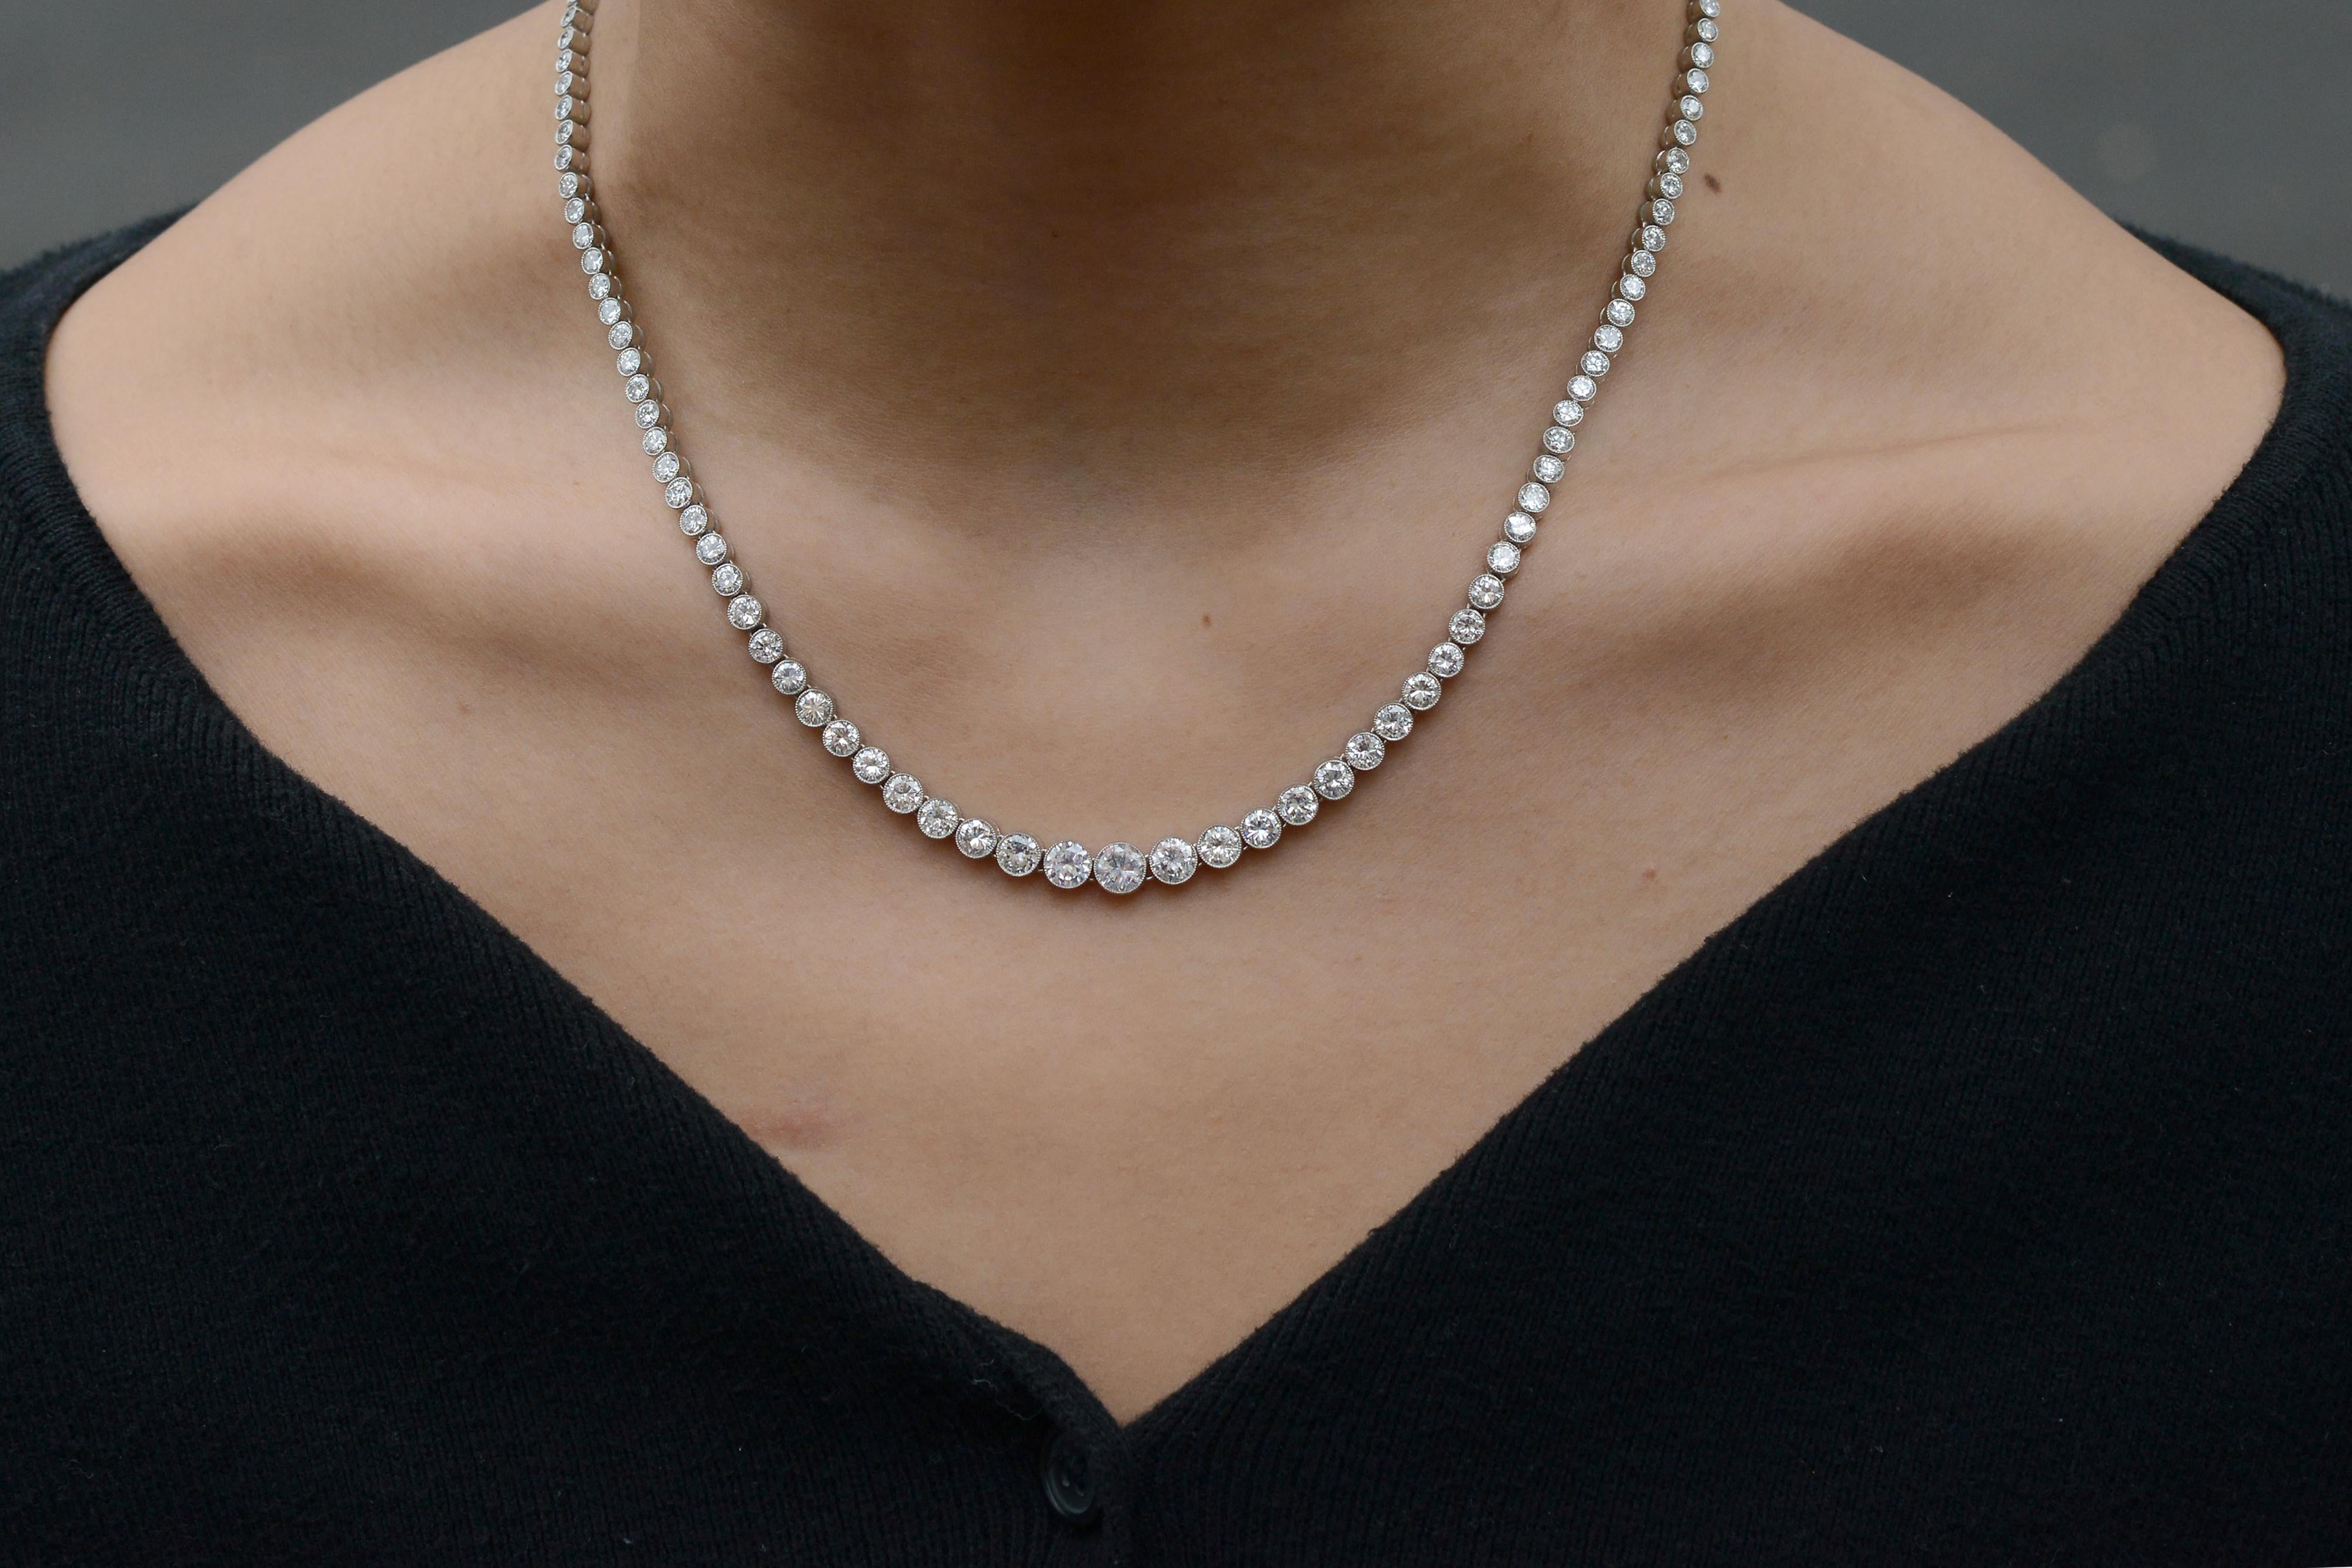 Over 14 carats of 119 flawlessly matched sparkling diamonds burst out of this elegant diamond Riviera necklace. Artfully recapturing the style of the Art Deco era with contemporary notes. You will love how the individual diamonds are surrounded by